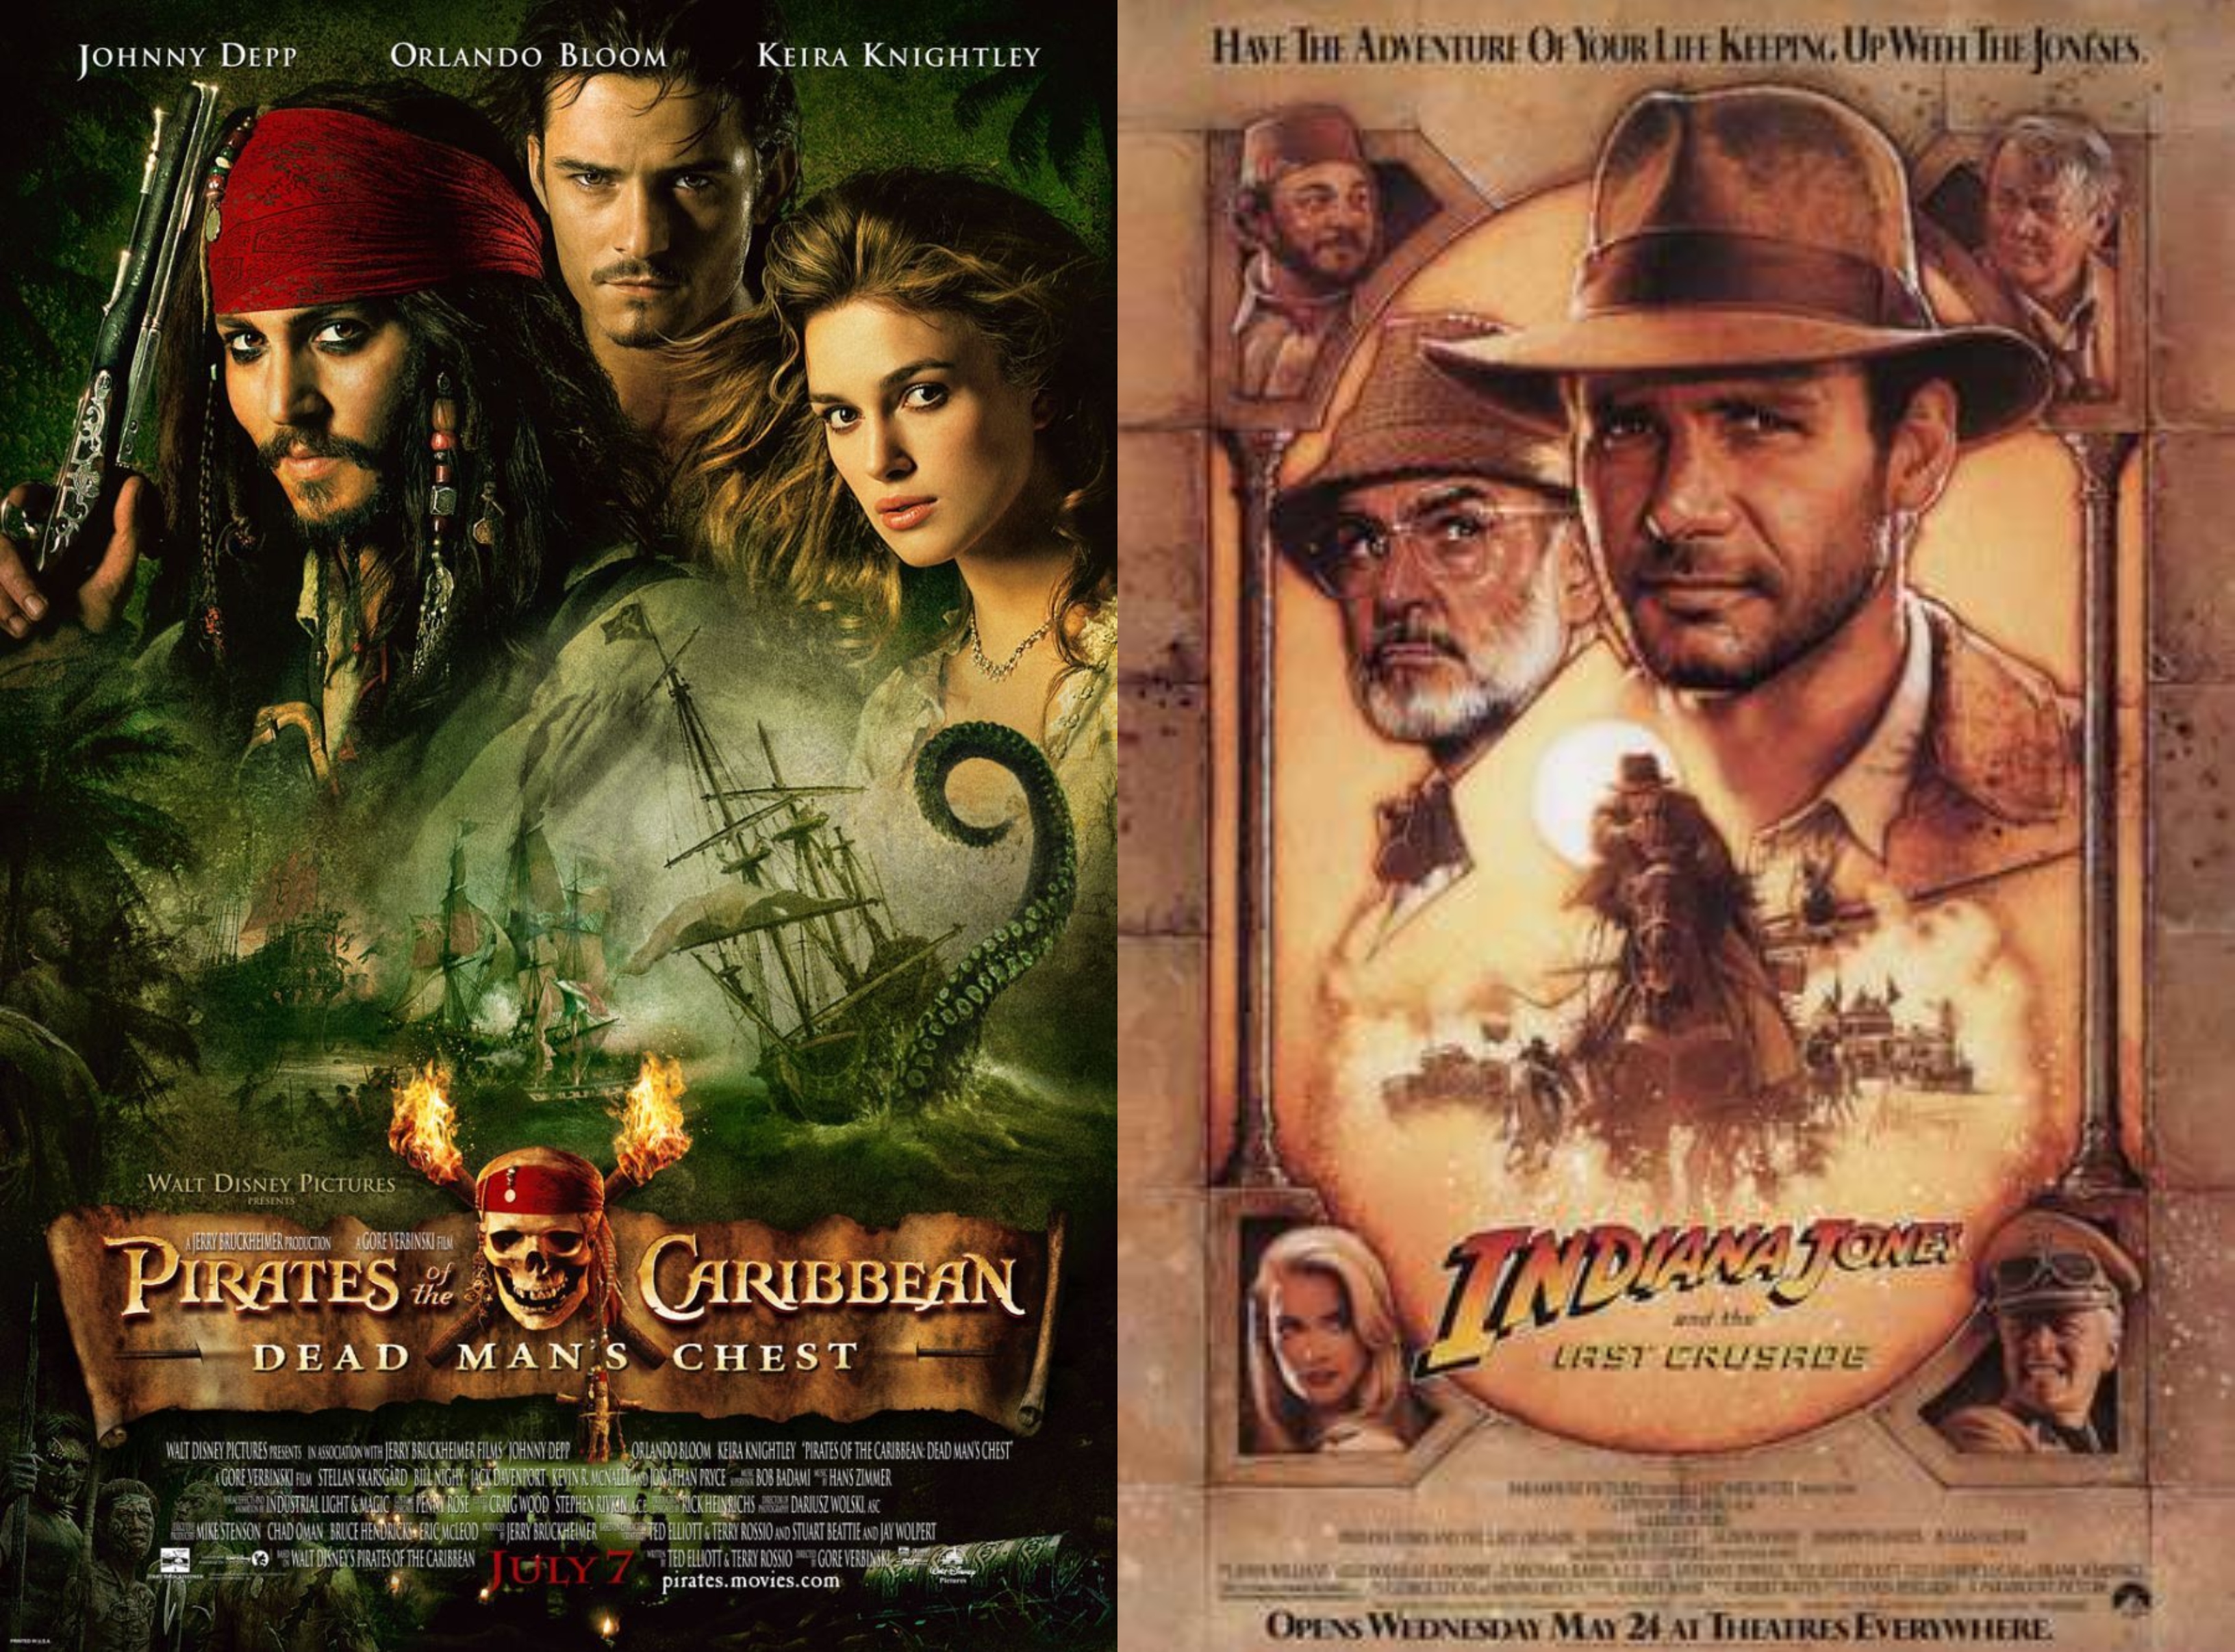 Posters for Pirates of the Caribbean: Dead Man's Chest and Indiana Jones and the Last Crusoe